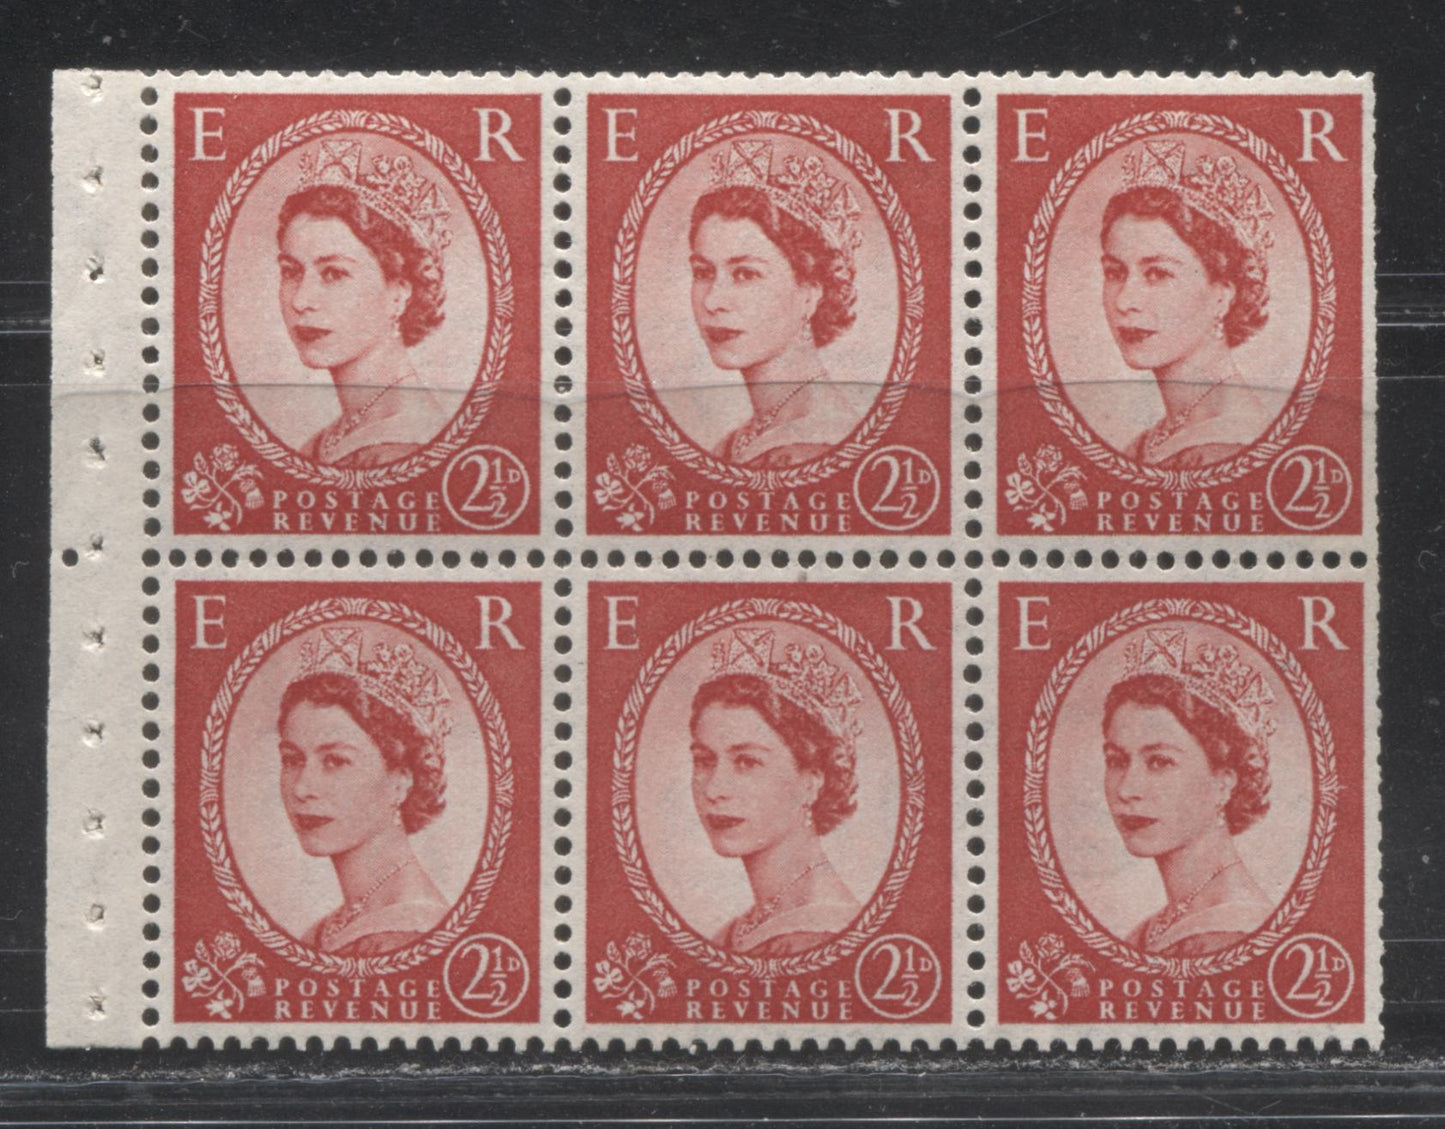 Great Britain SG#H39g 5/- Light Grey Blue & Black Cover 1959 Wilding Graphite Issue, A Complete Booklet With Mixed Upright and Inverted Multiple St. Edward's Crown Watermark, Panes of 6, Type C GPO Cypher, July 1959